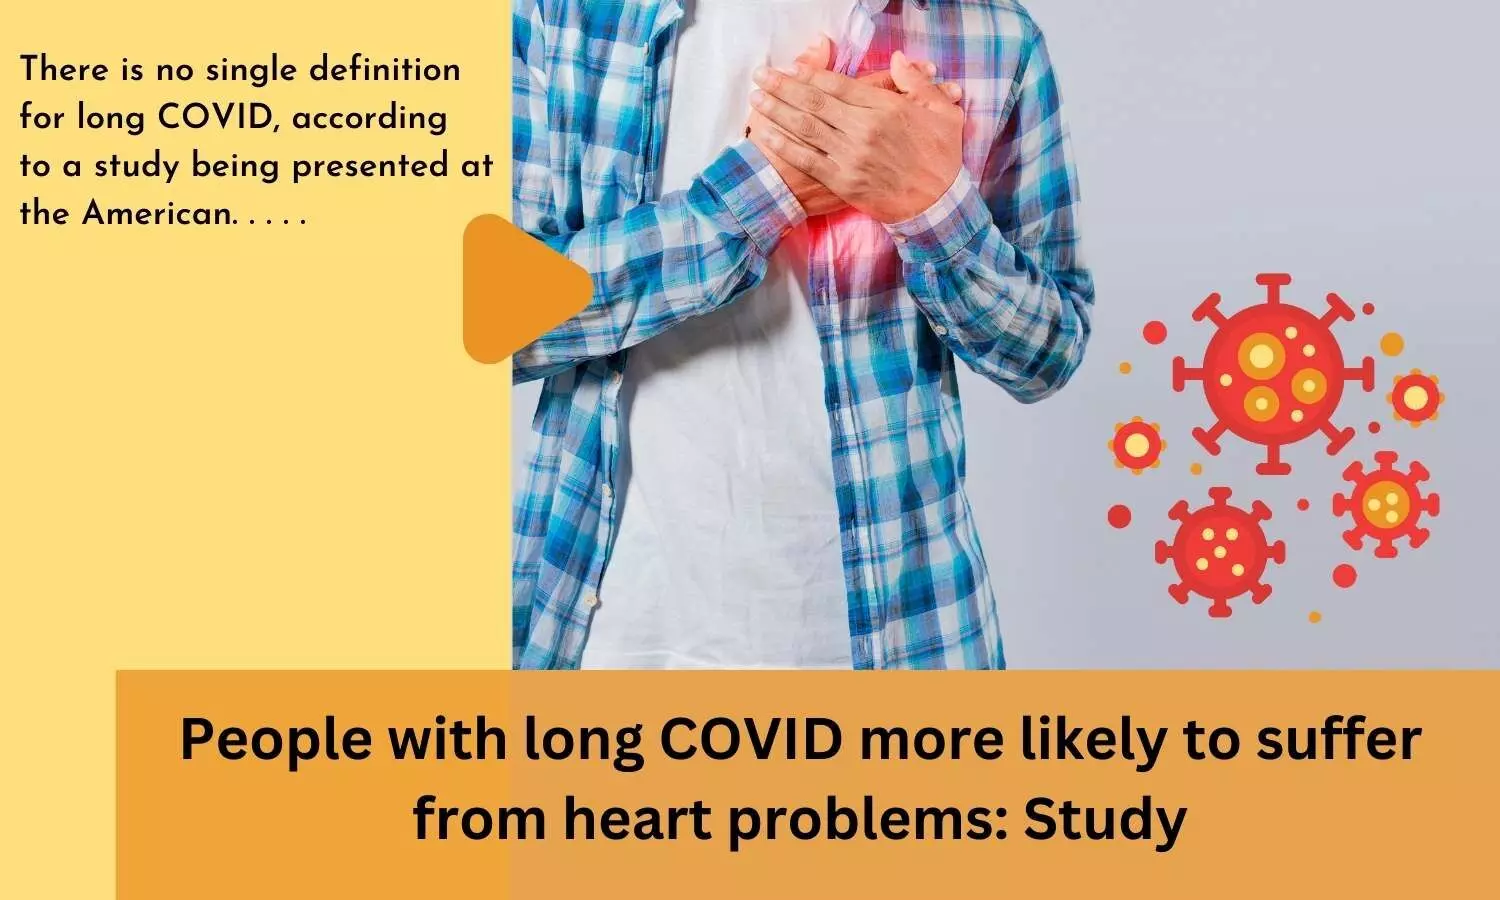 People with long COVID more likely to suffer from heart problems: Study